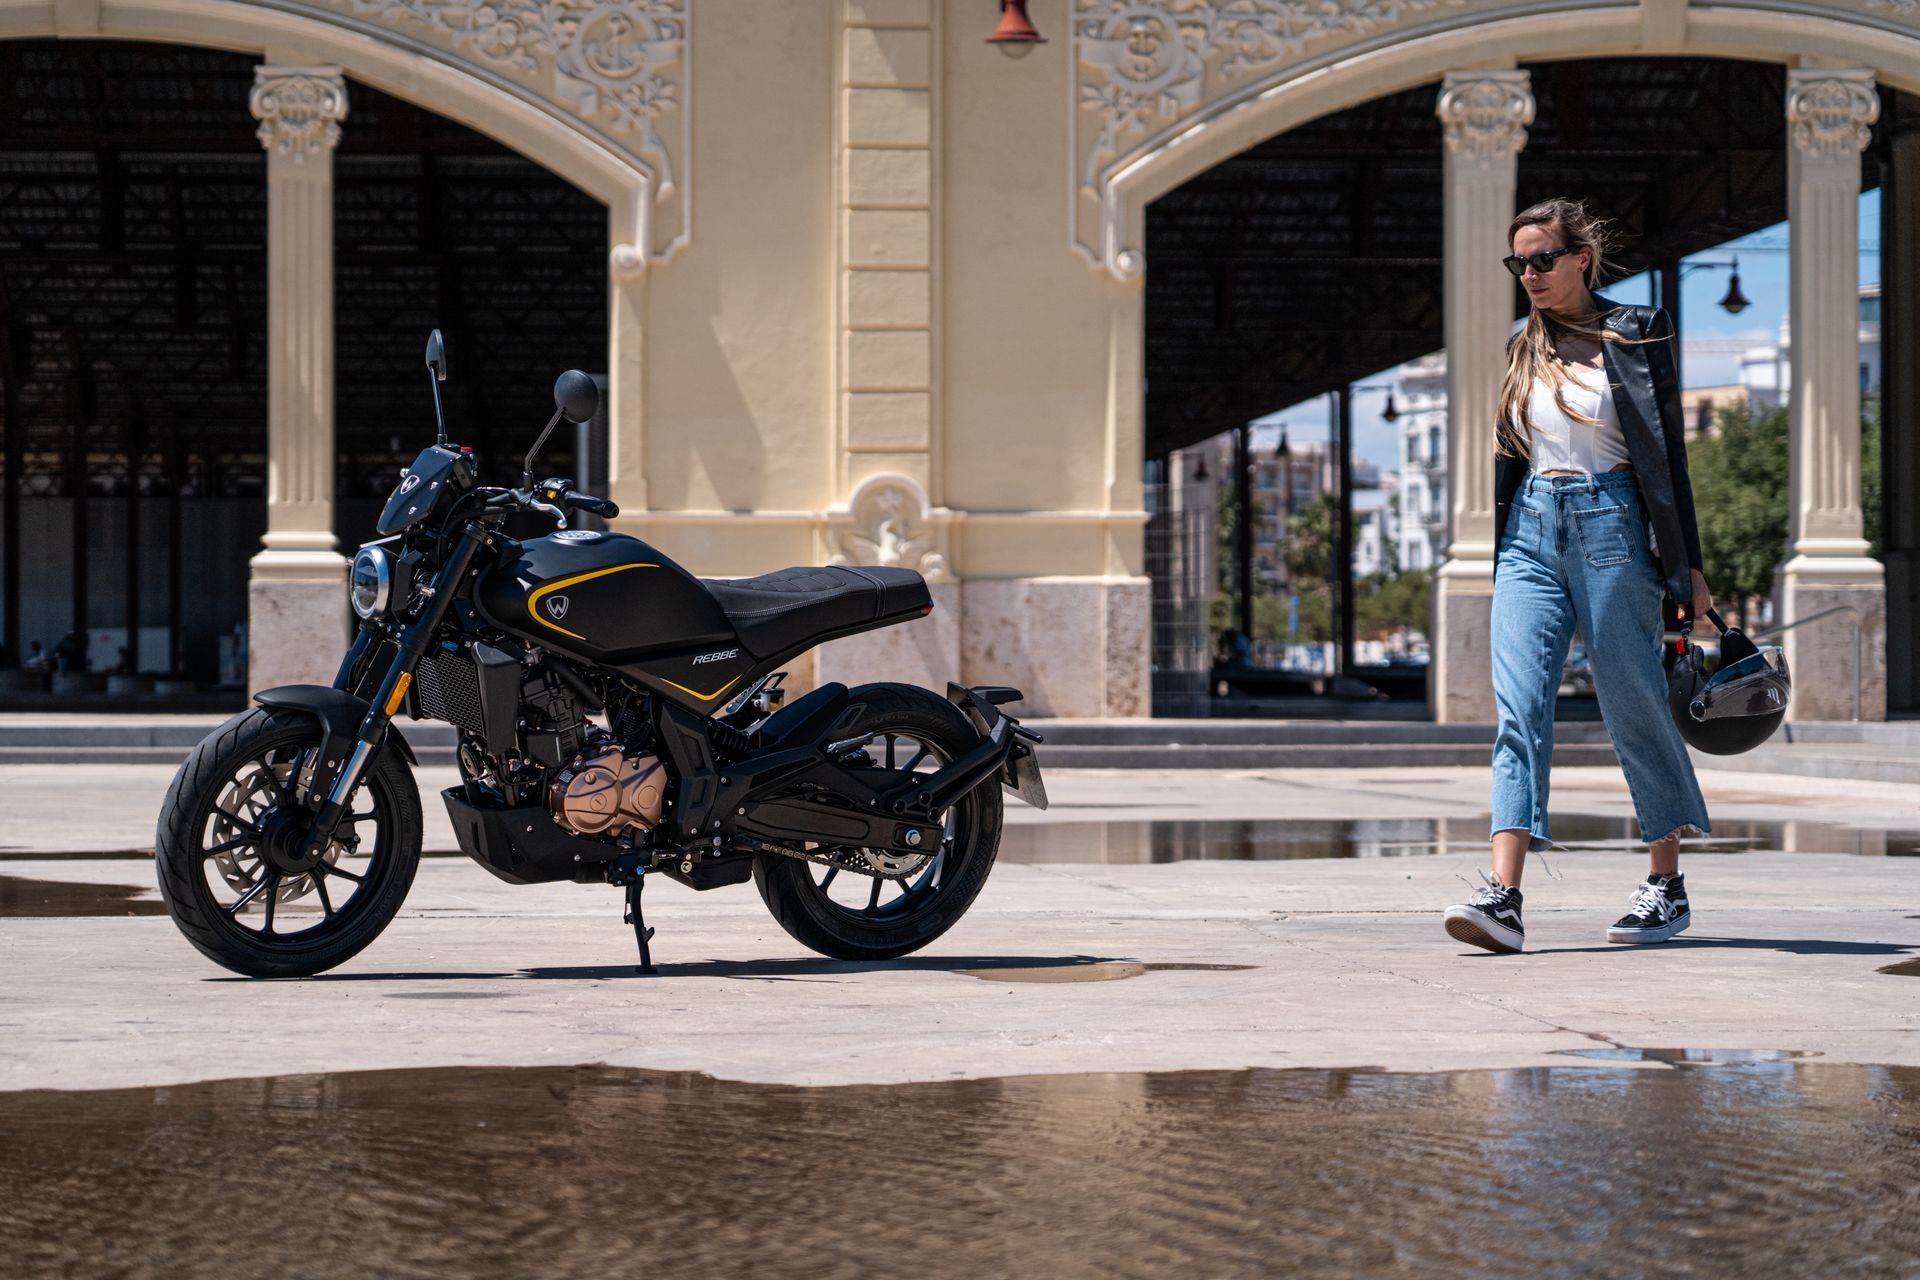 [Moto Rebbe 125] Escapades with style and freedom.